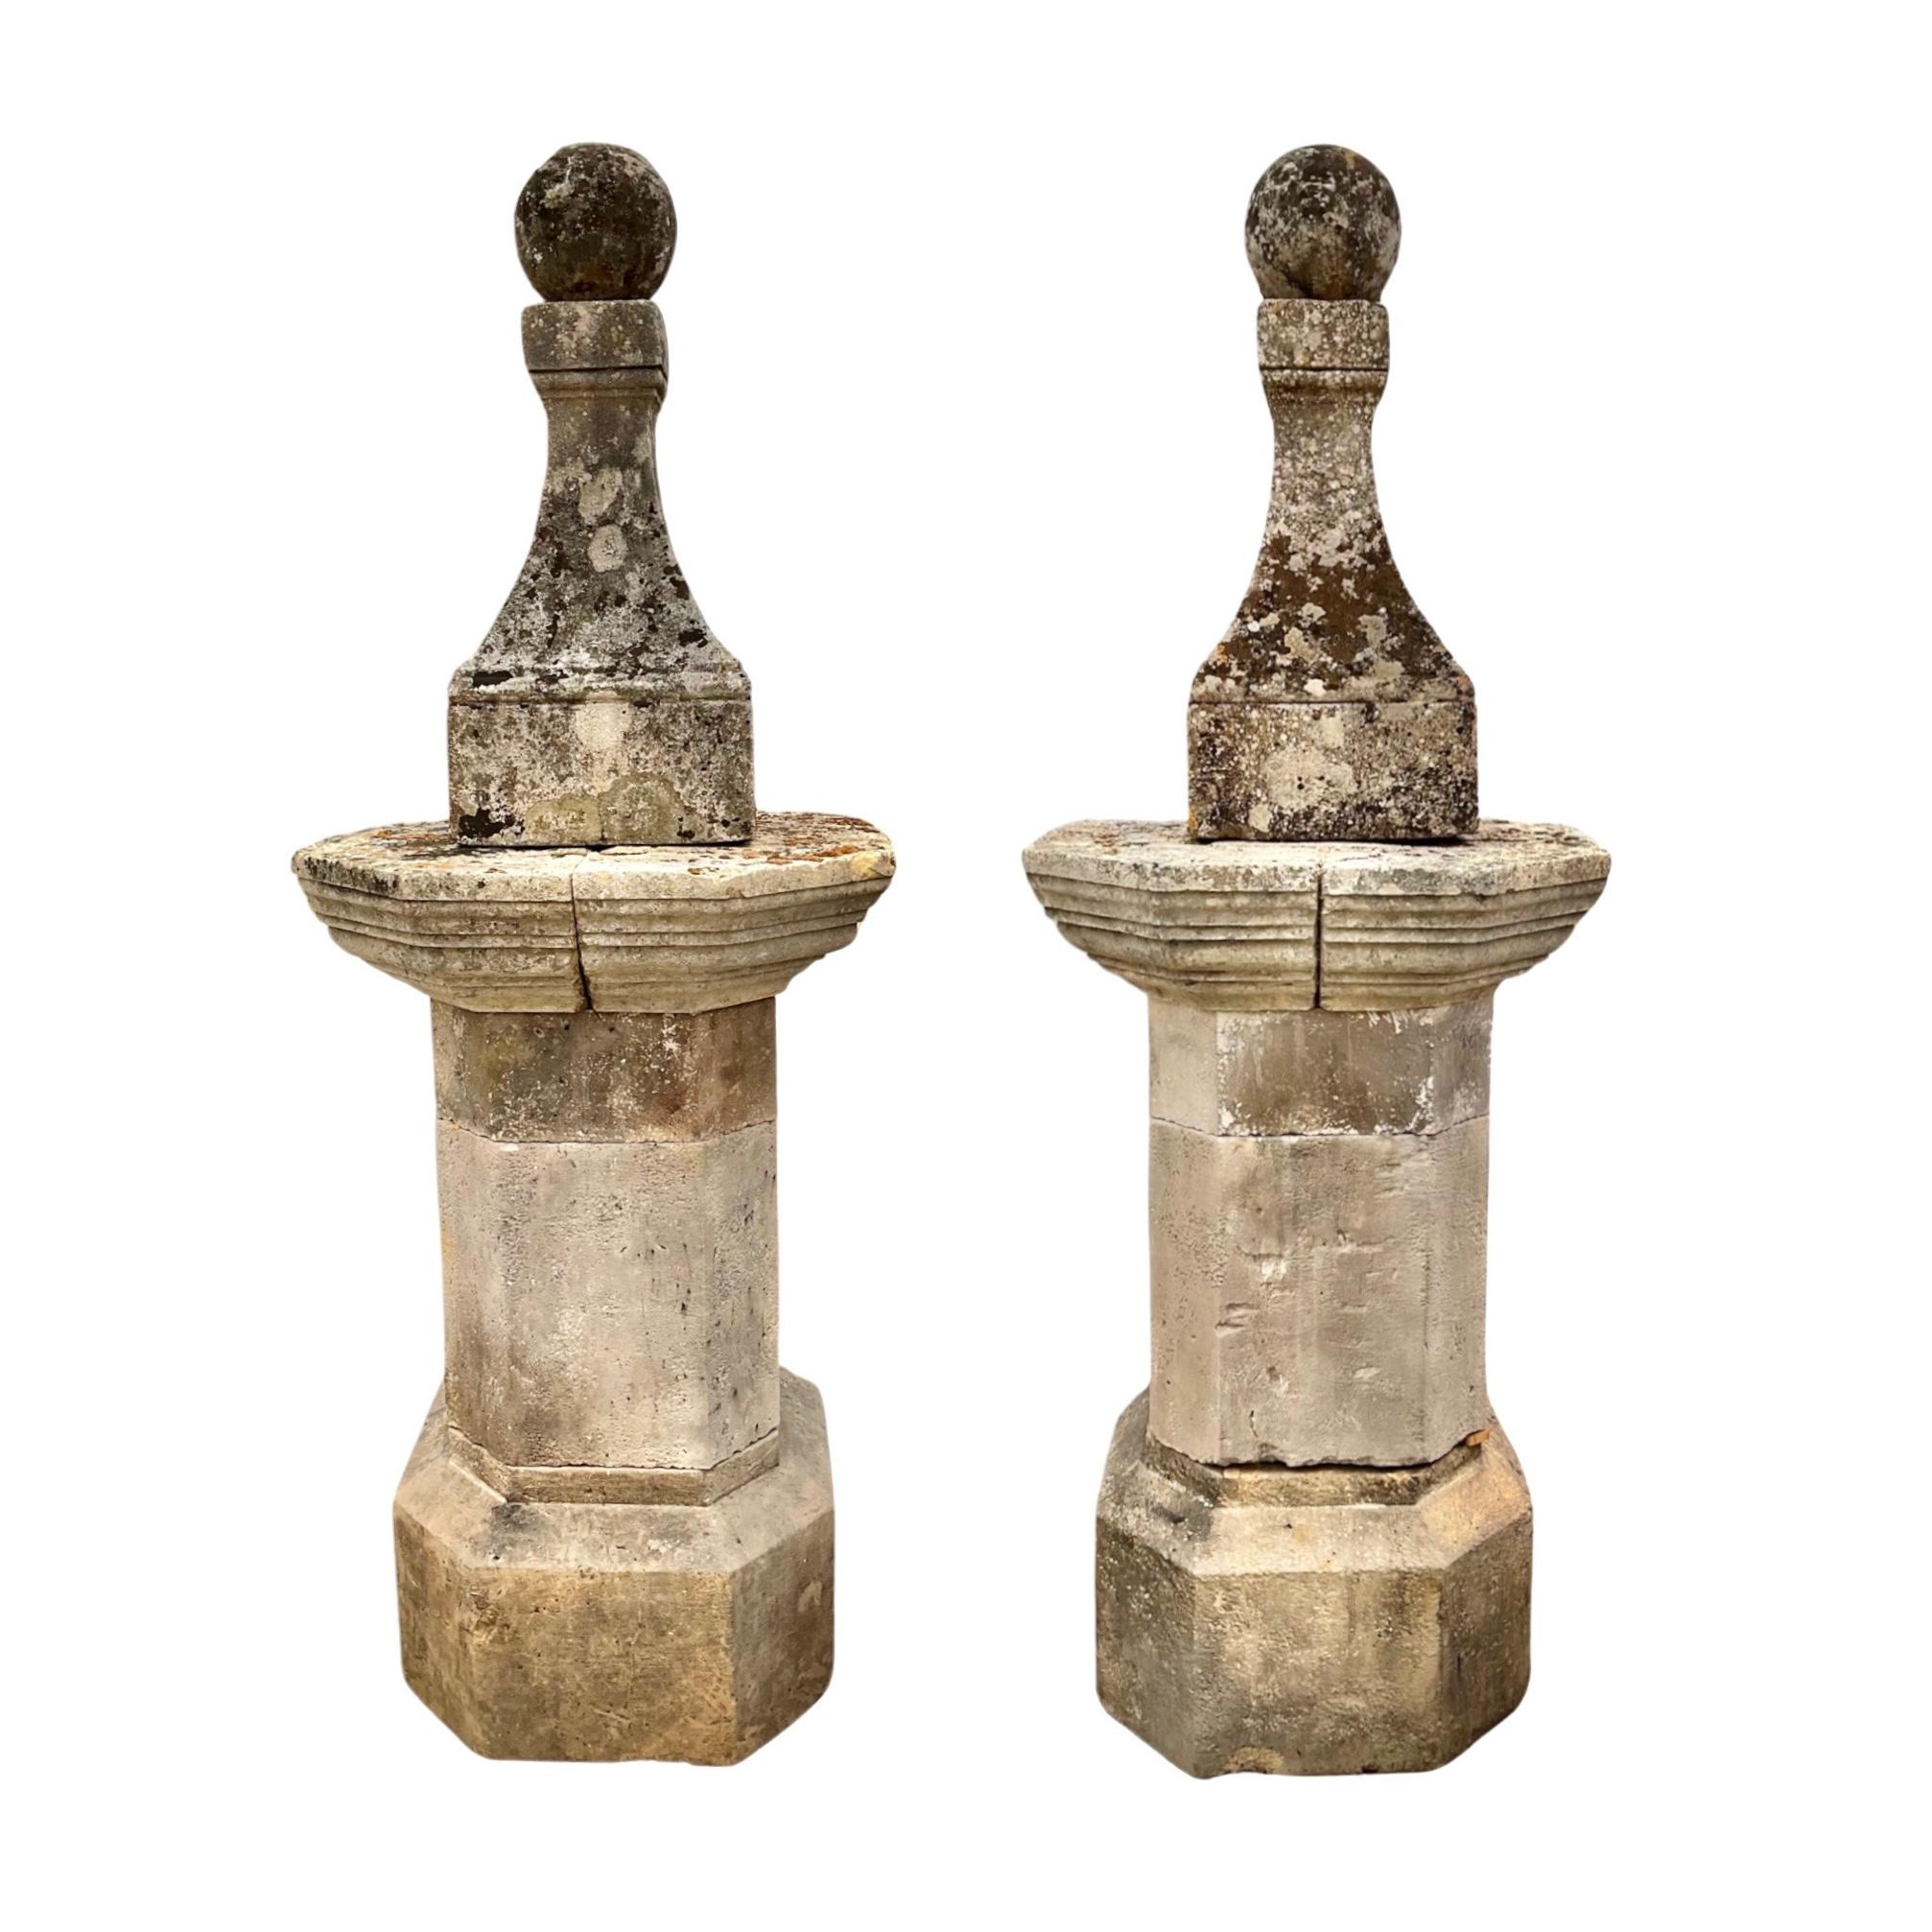 Enhance your home or garden with this antique pair of French limestone finials. Crafted in the 17th century and sold as a set, these large style finials will add a touch of French elegance to any space. Perfect for architectural or decorative use.